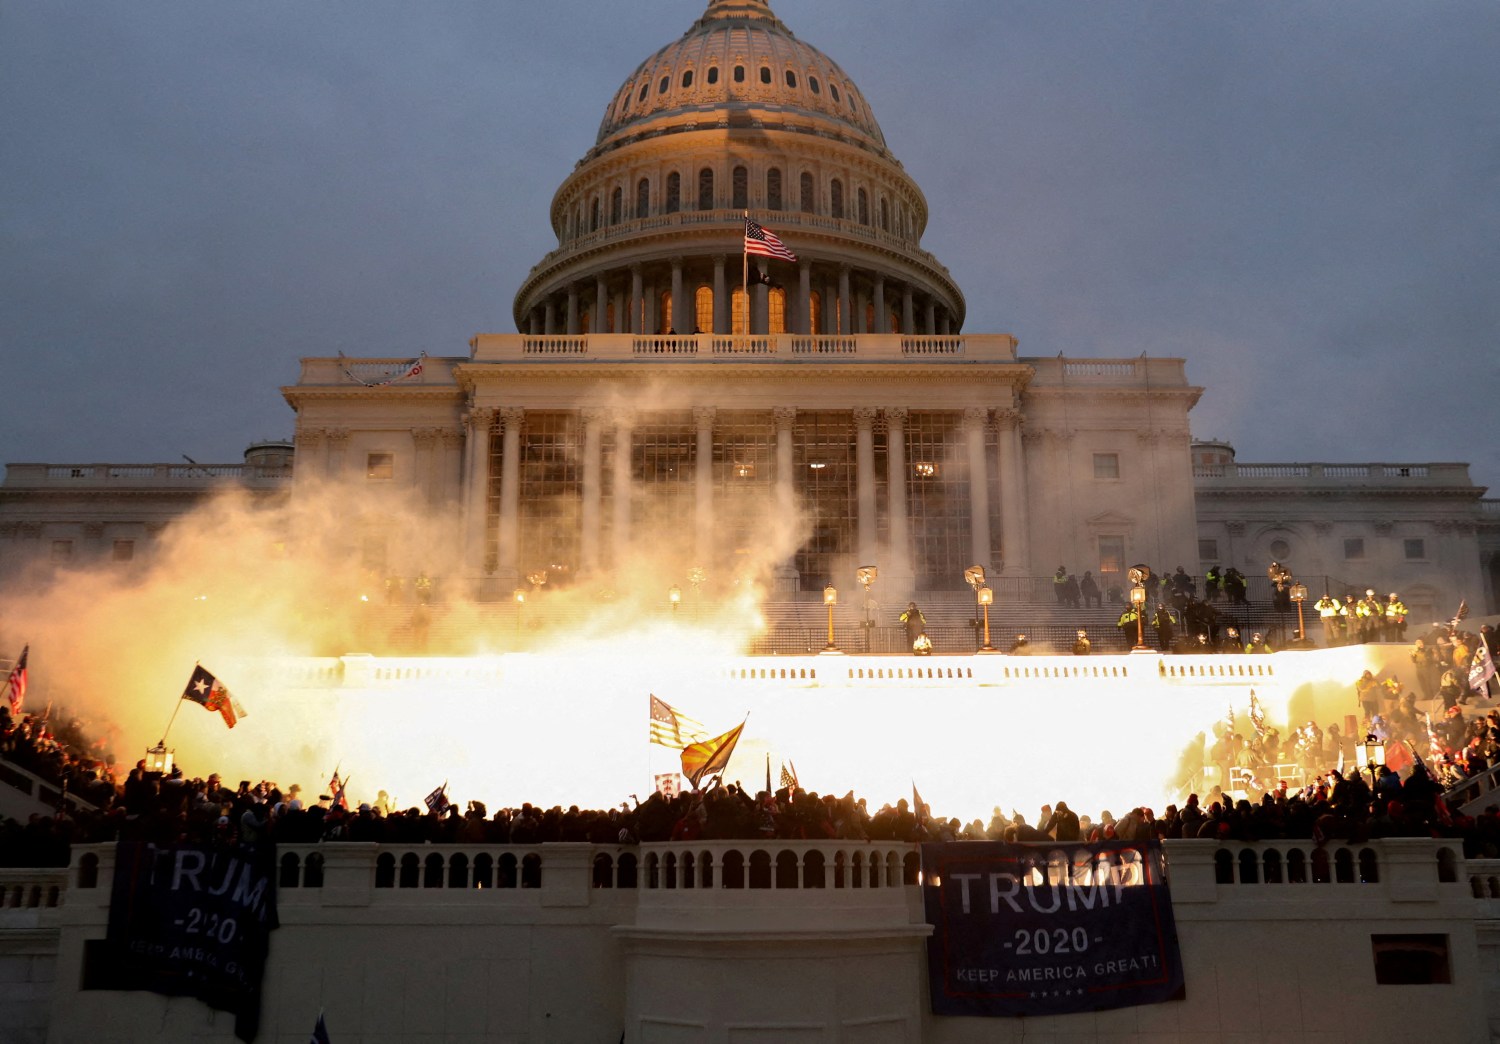 FILE PHOTO: An explosion caused by a police munition is seen while supporters of U.S. President Donald Trump riot at the U.S. Capitol Building in Washington, U.S., January 6, 2021. REUTERS/Leah Millis/File Photo